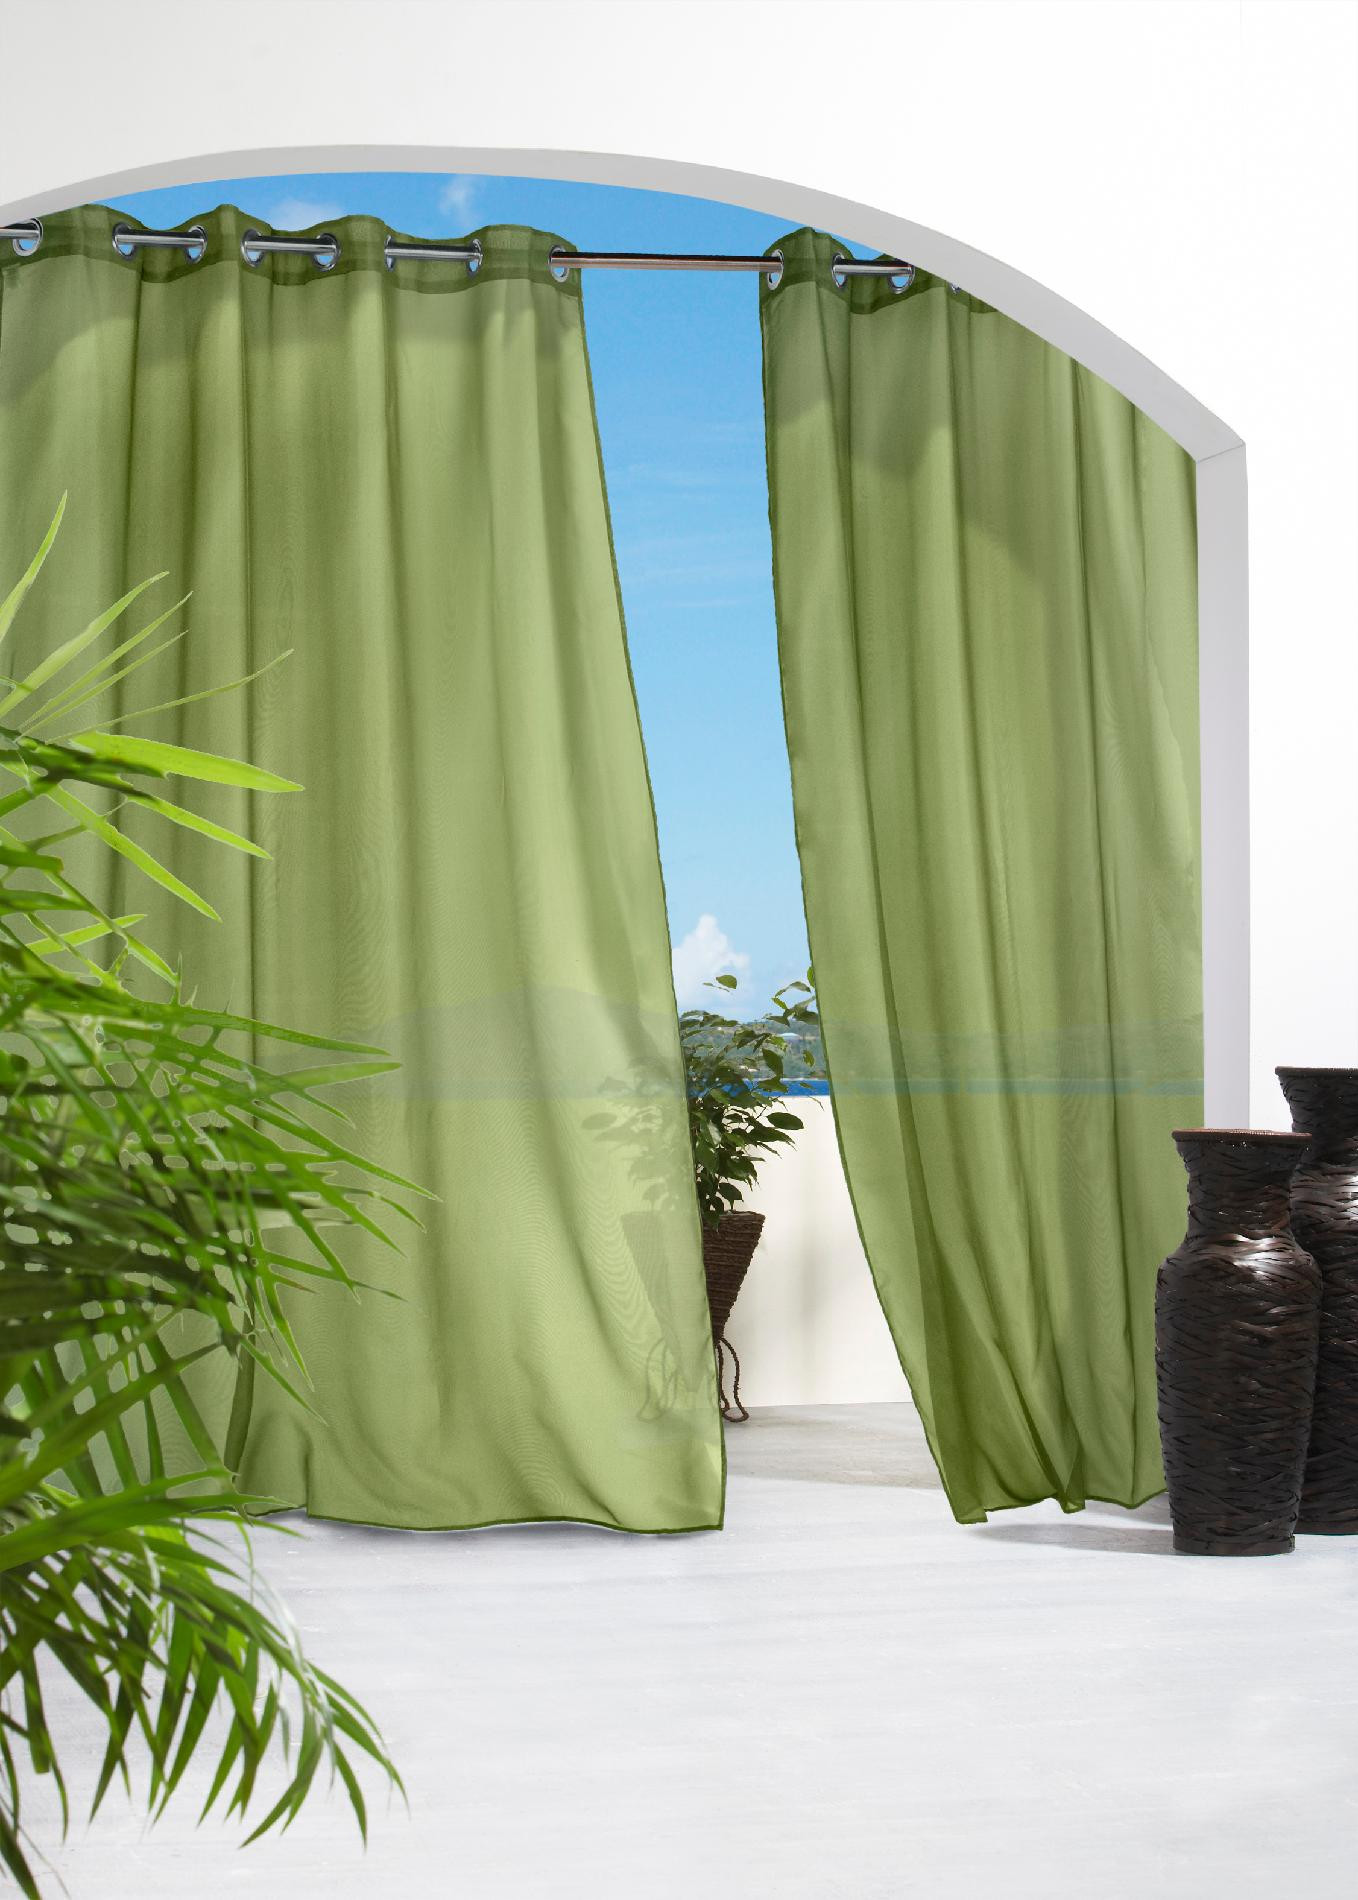 Sears Curtains For Living Room
 Drapes & Curtains Buy Drapes & Curtains in Window